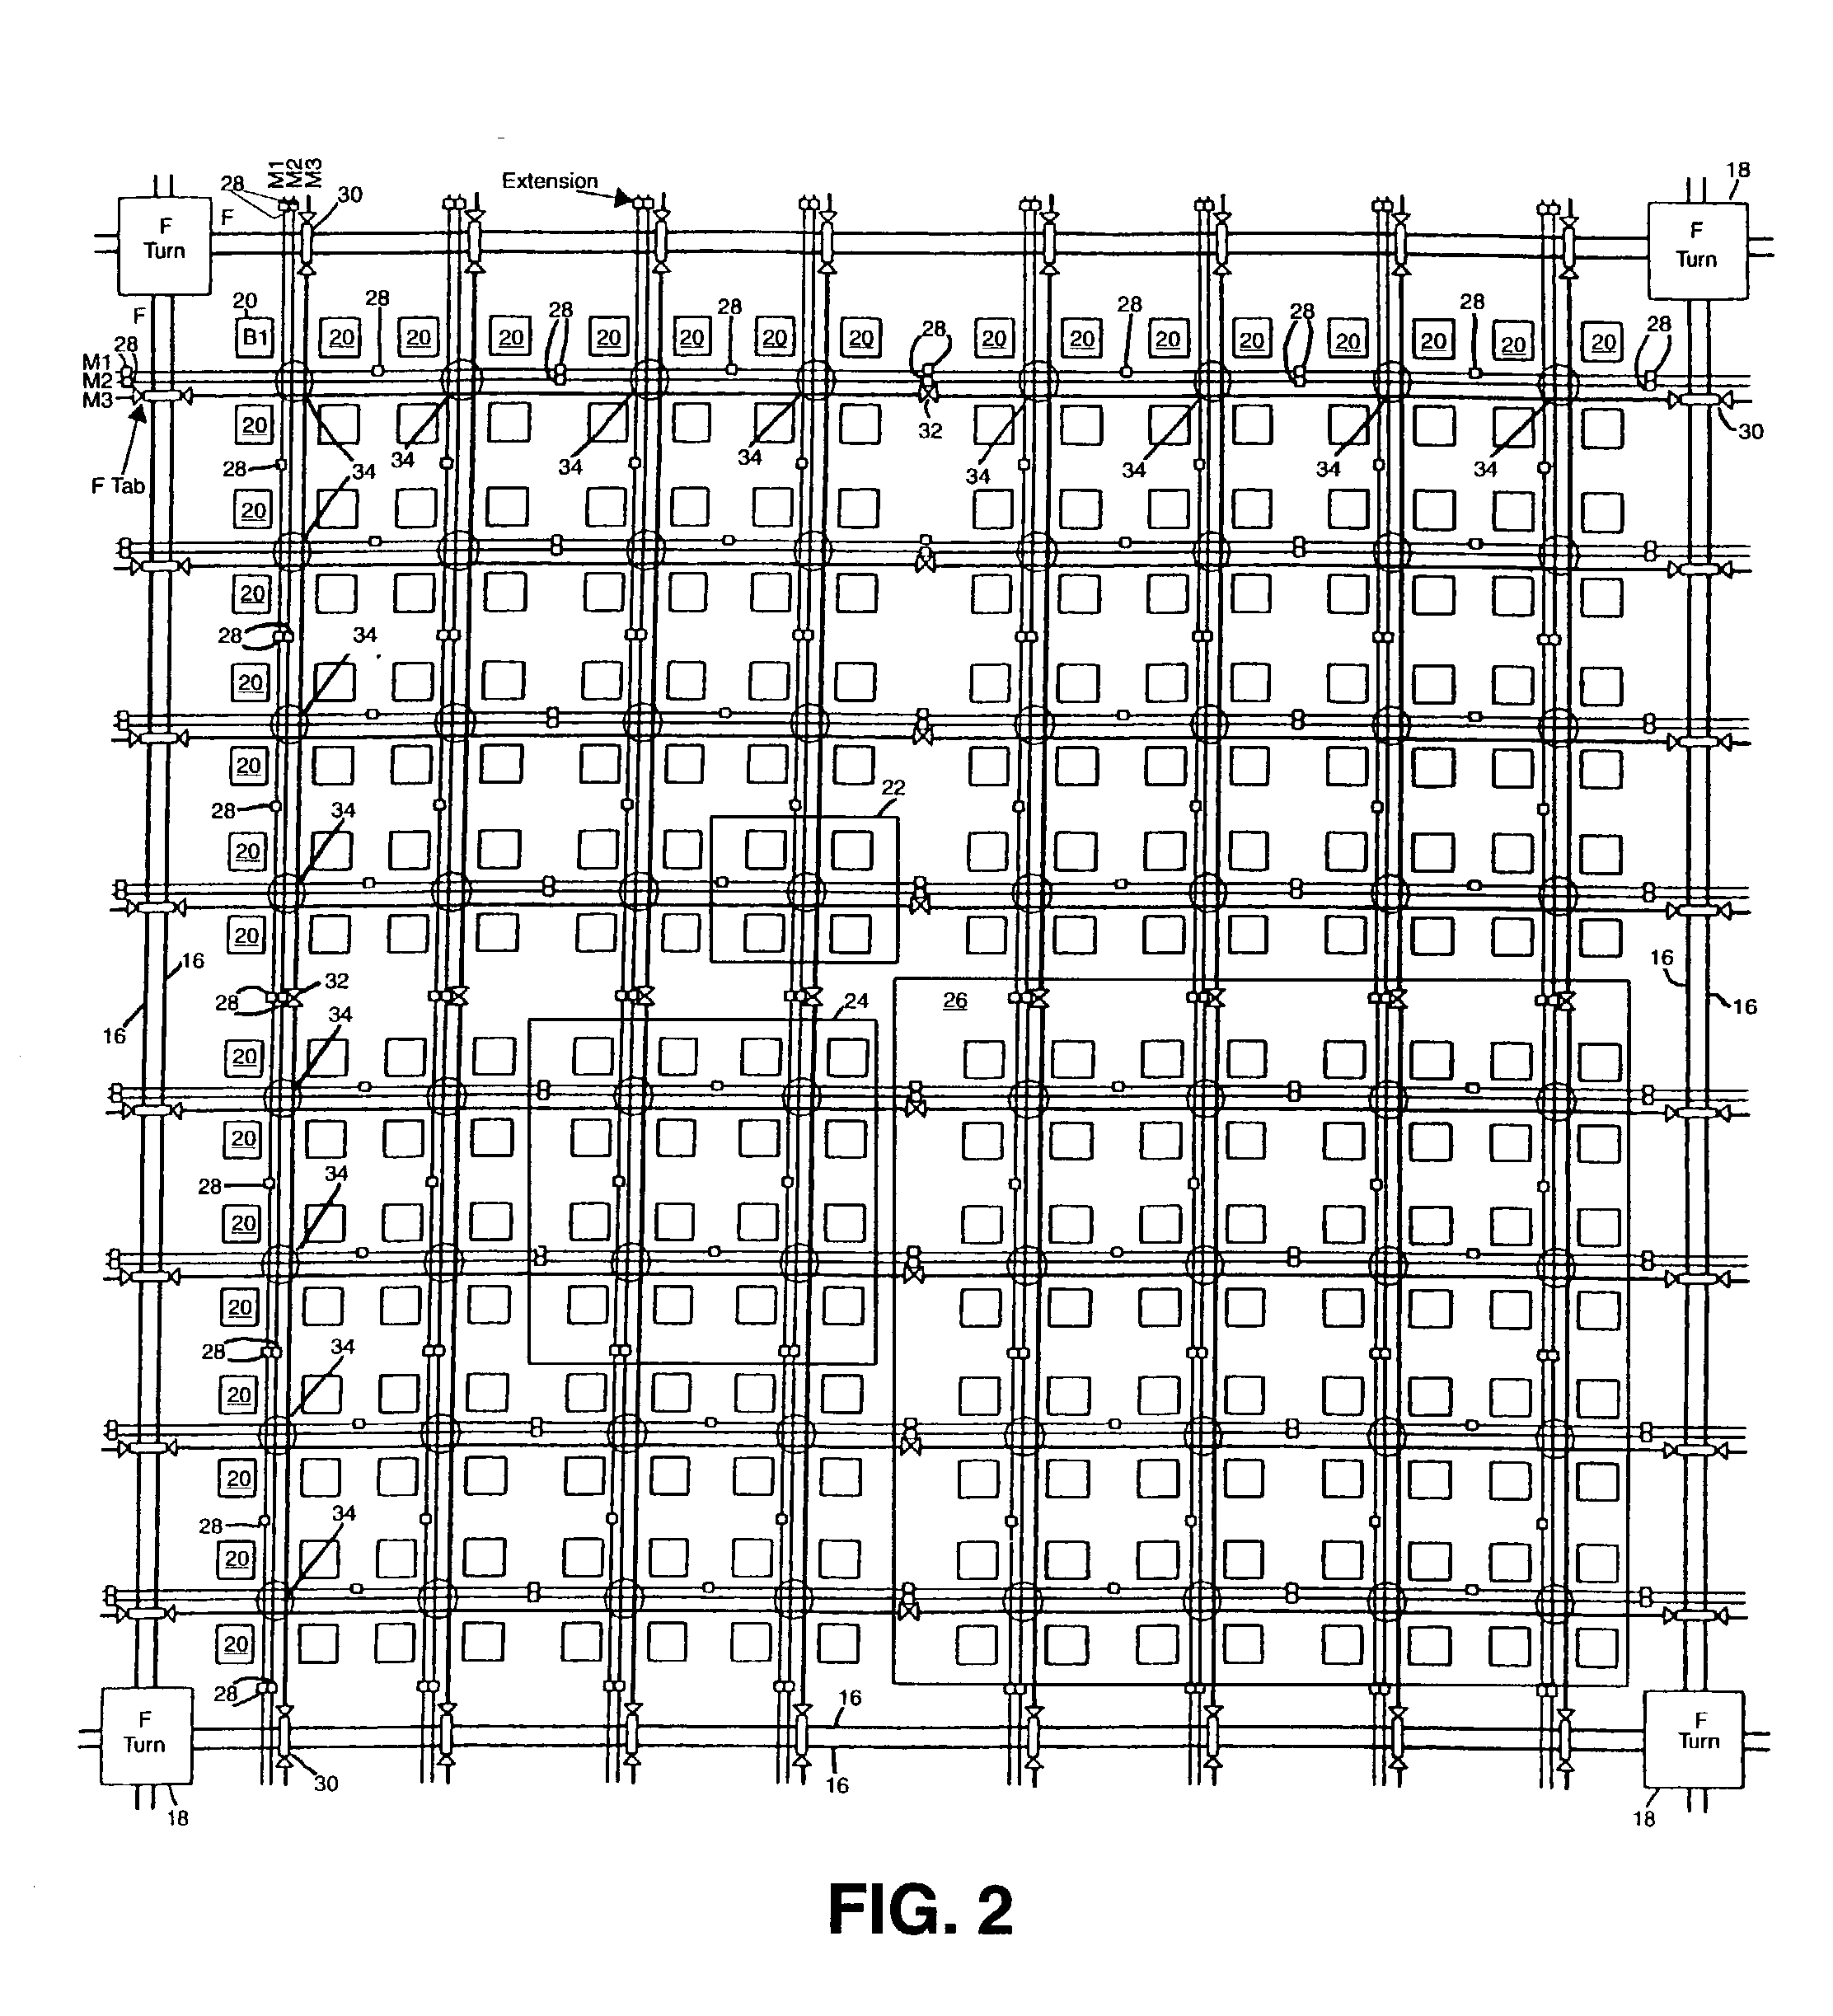 Block level routing architecture in a field programmable gate array